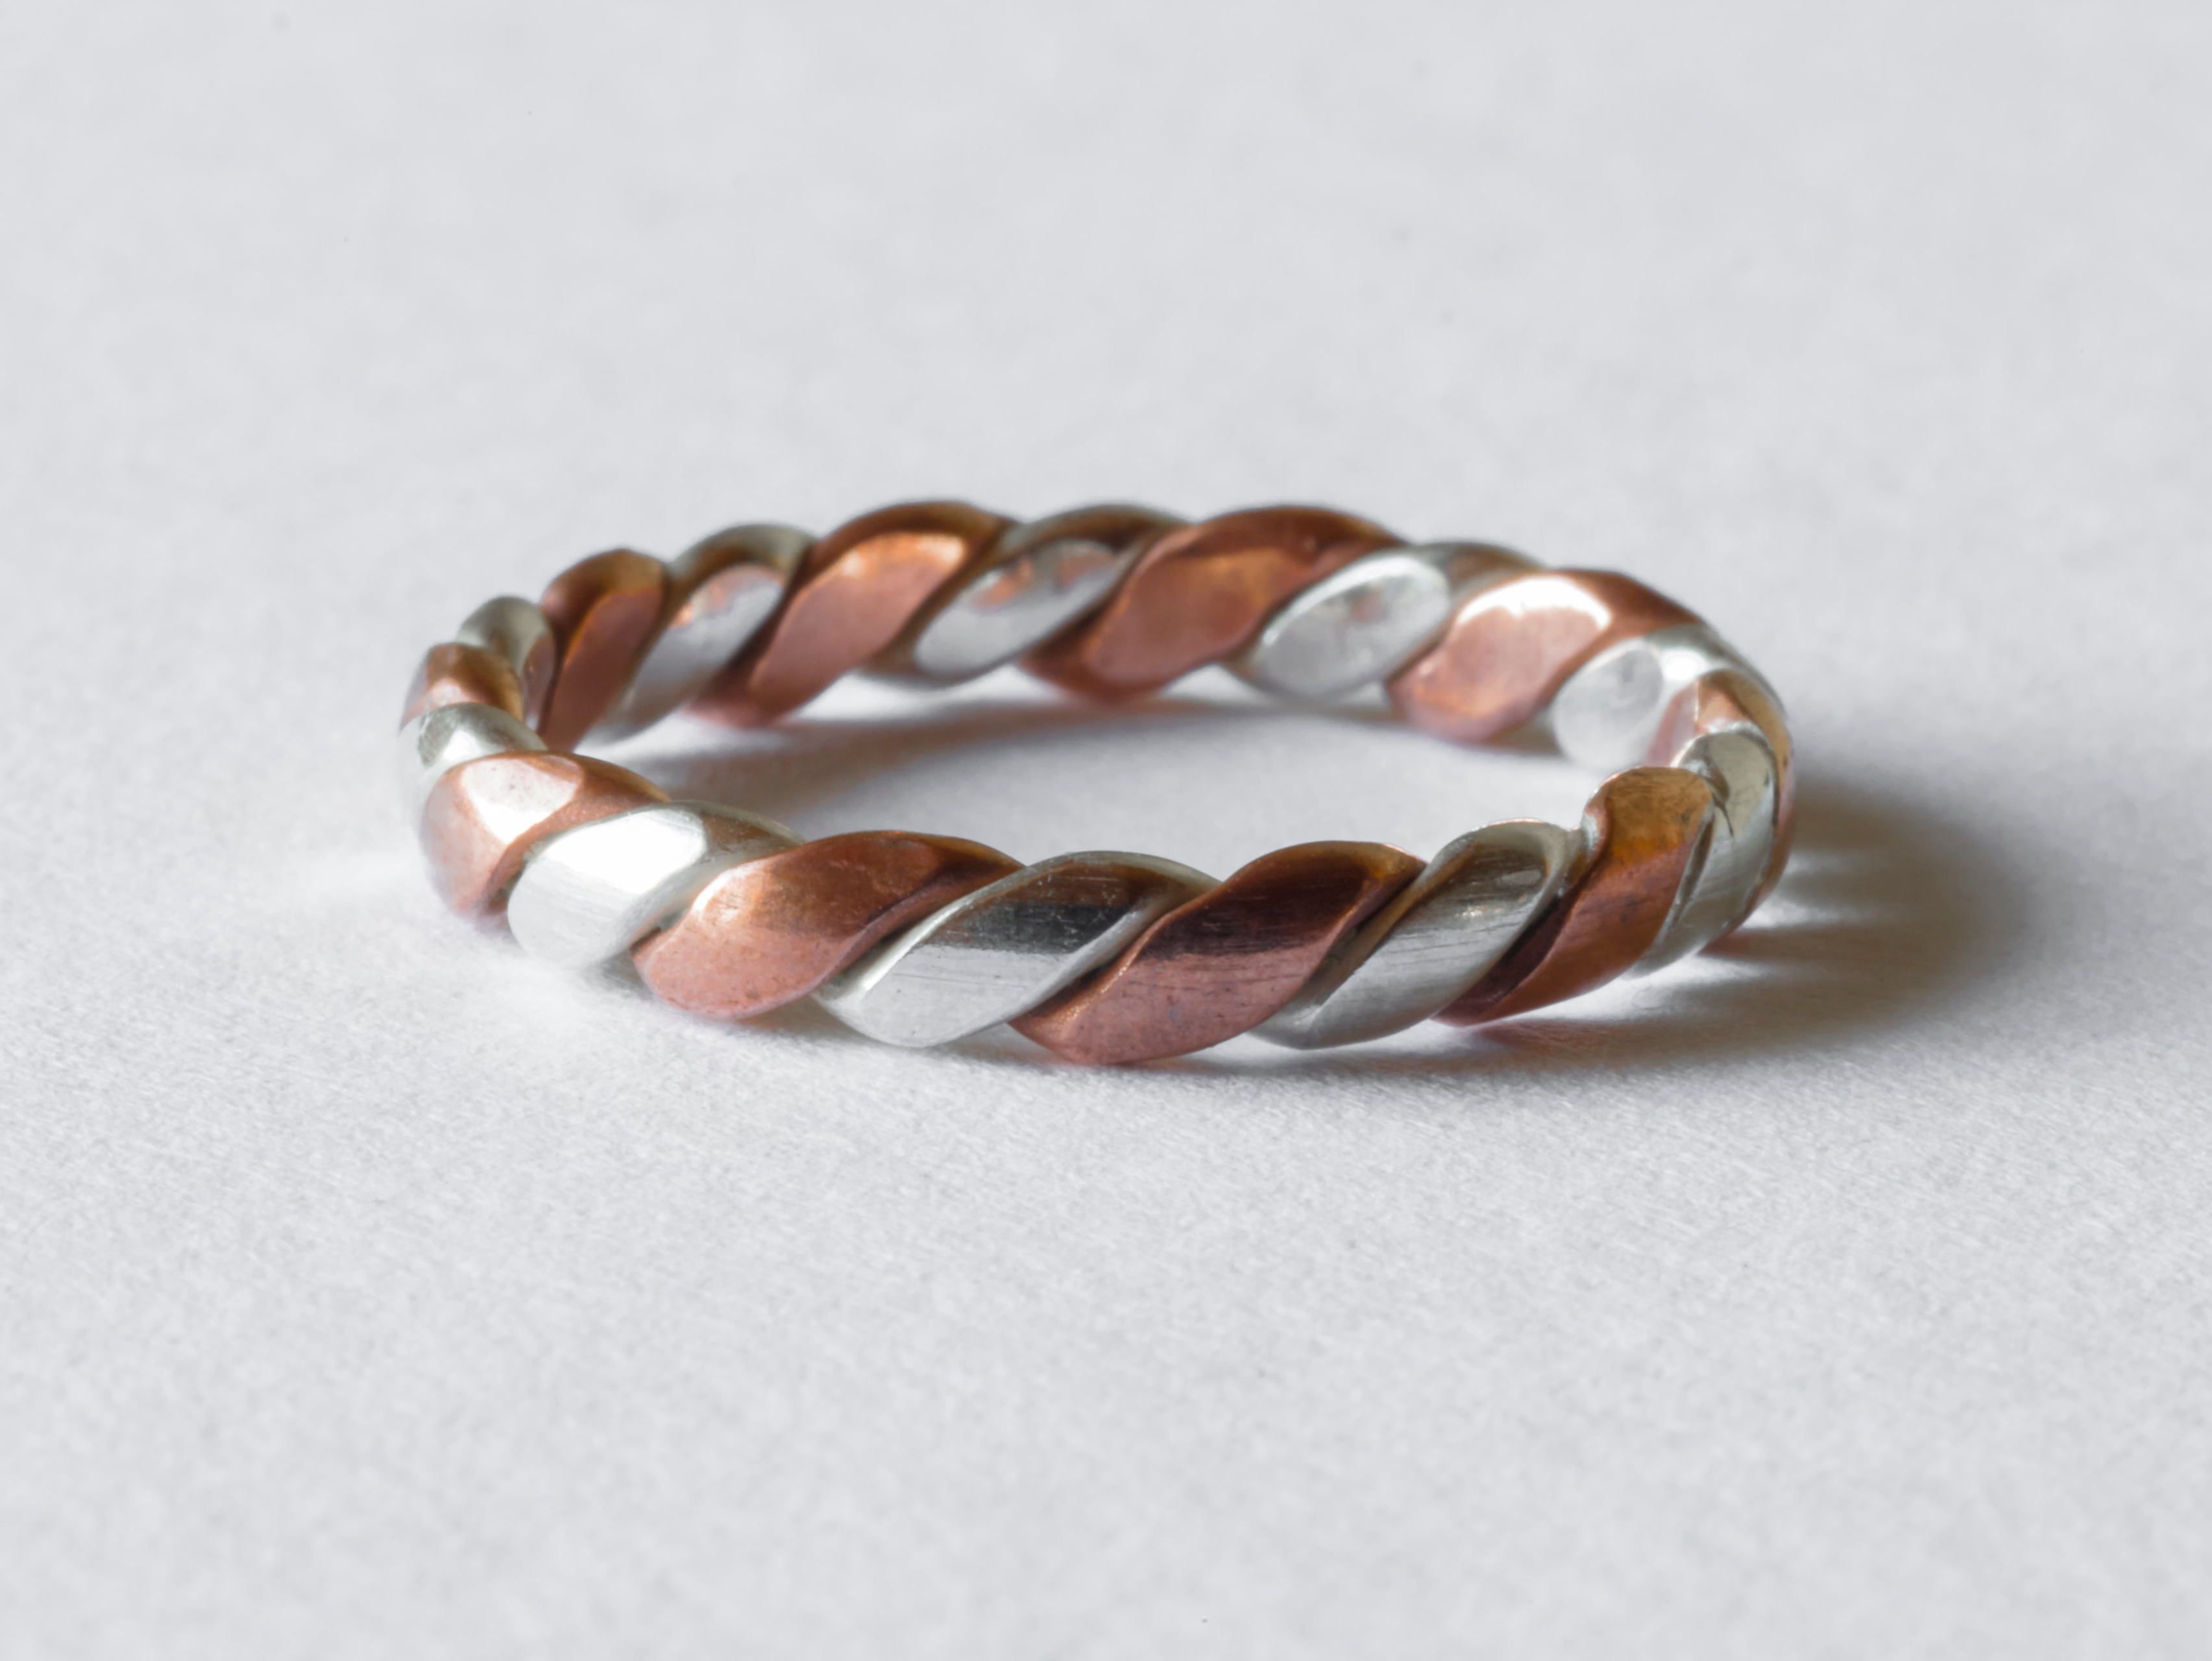 Handmade Silver and Copper Twist Ring